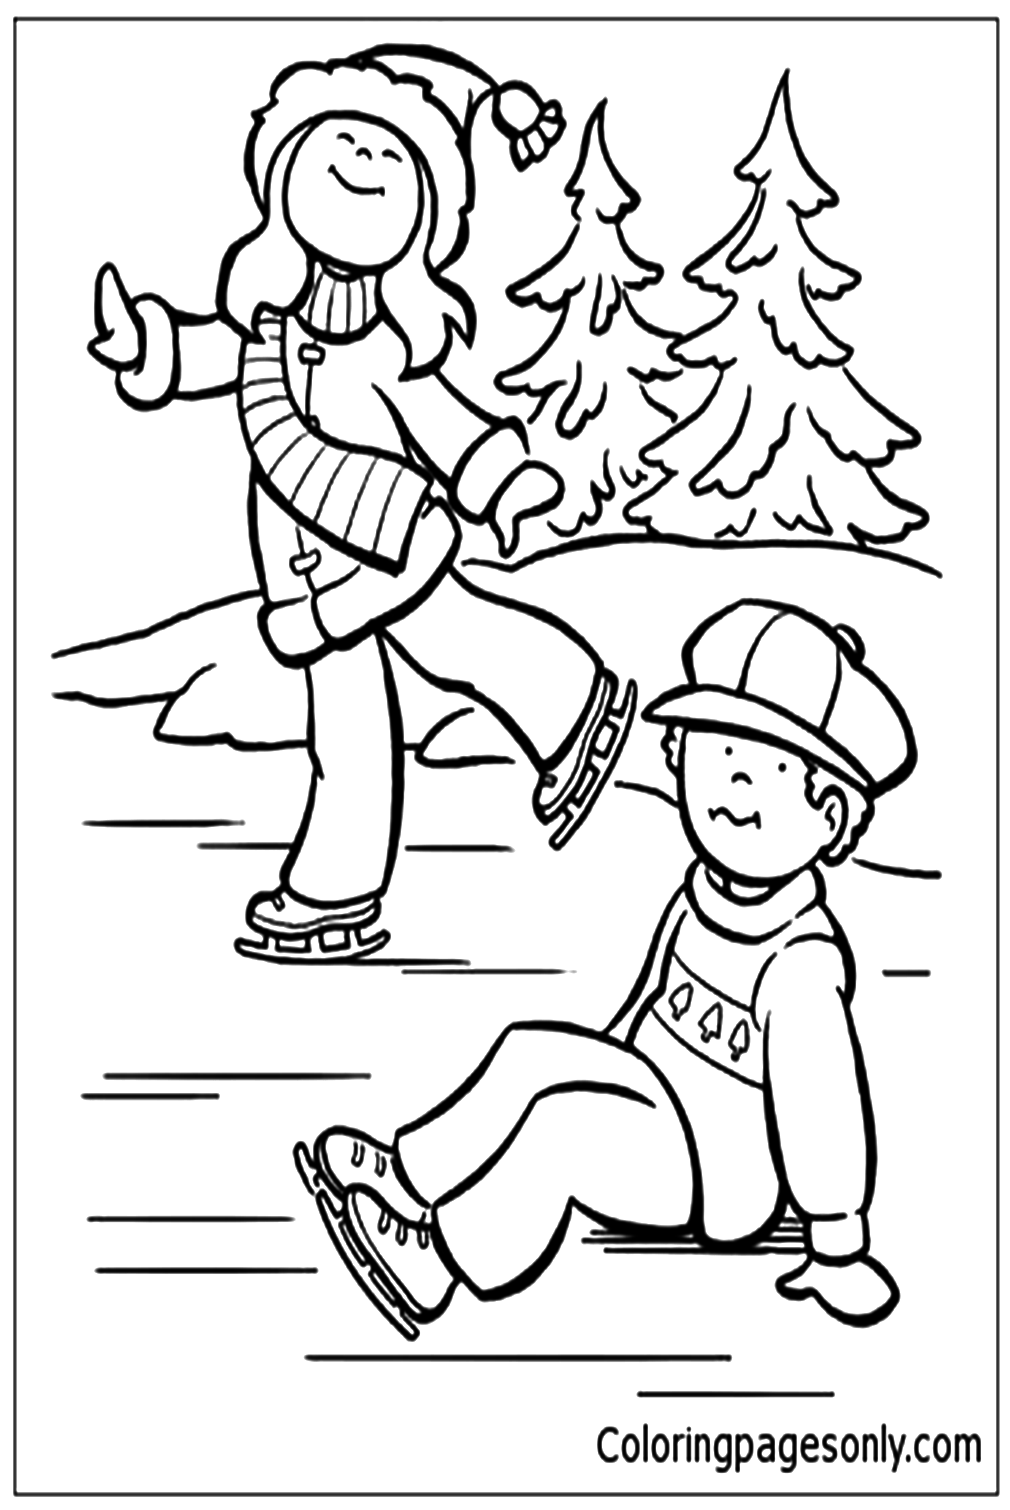 Younger Ice-Skaters Coloring Page - Free Printable Coloring Pages